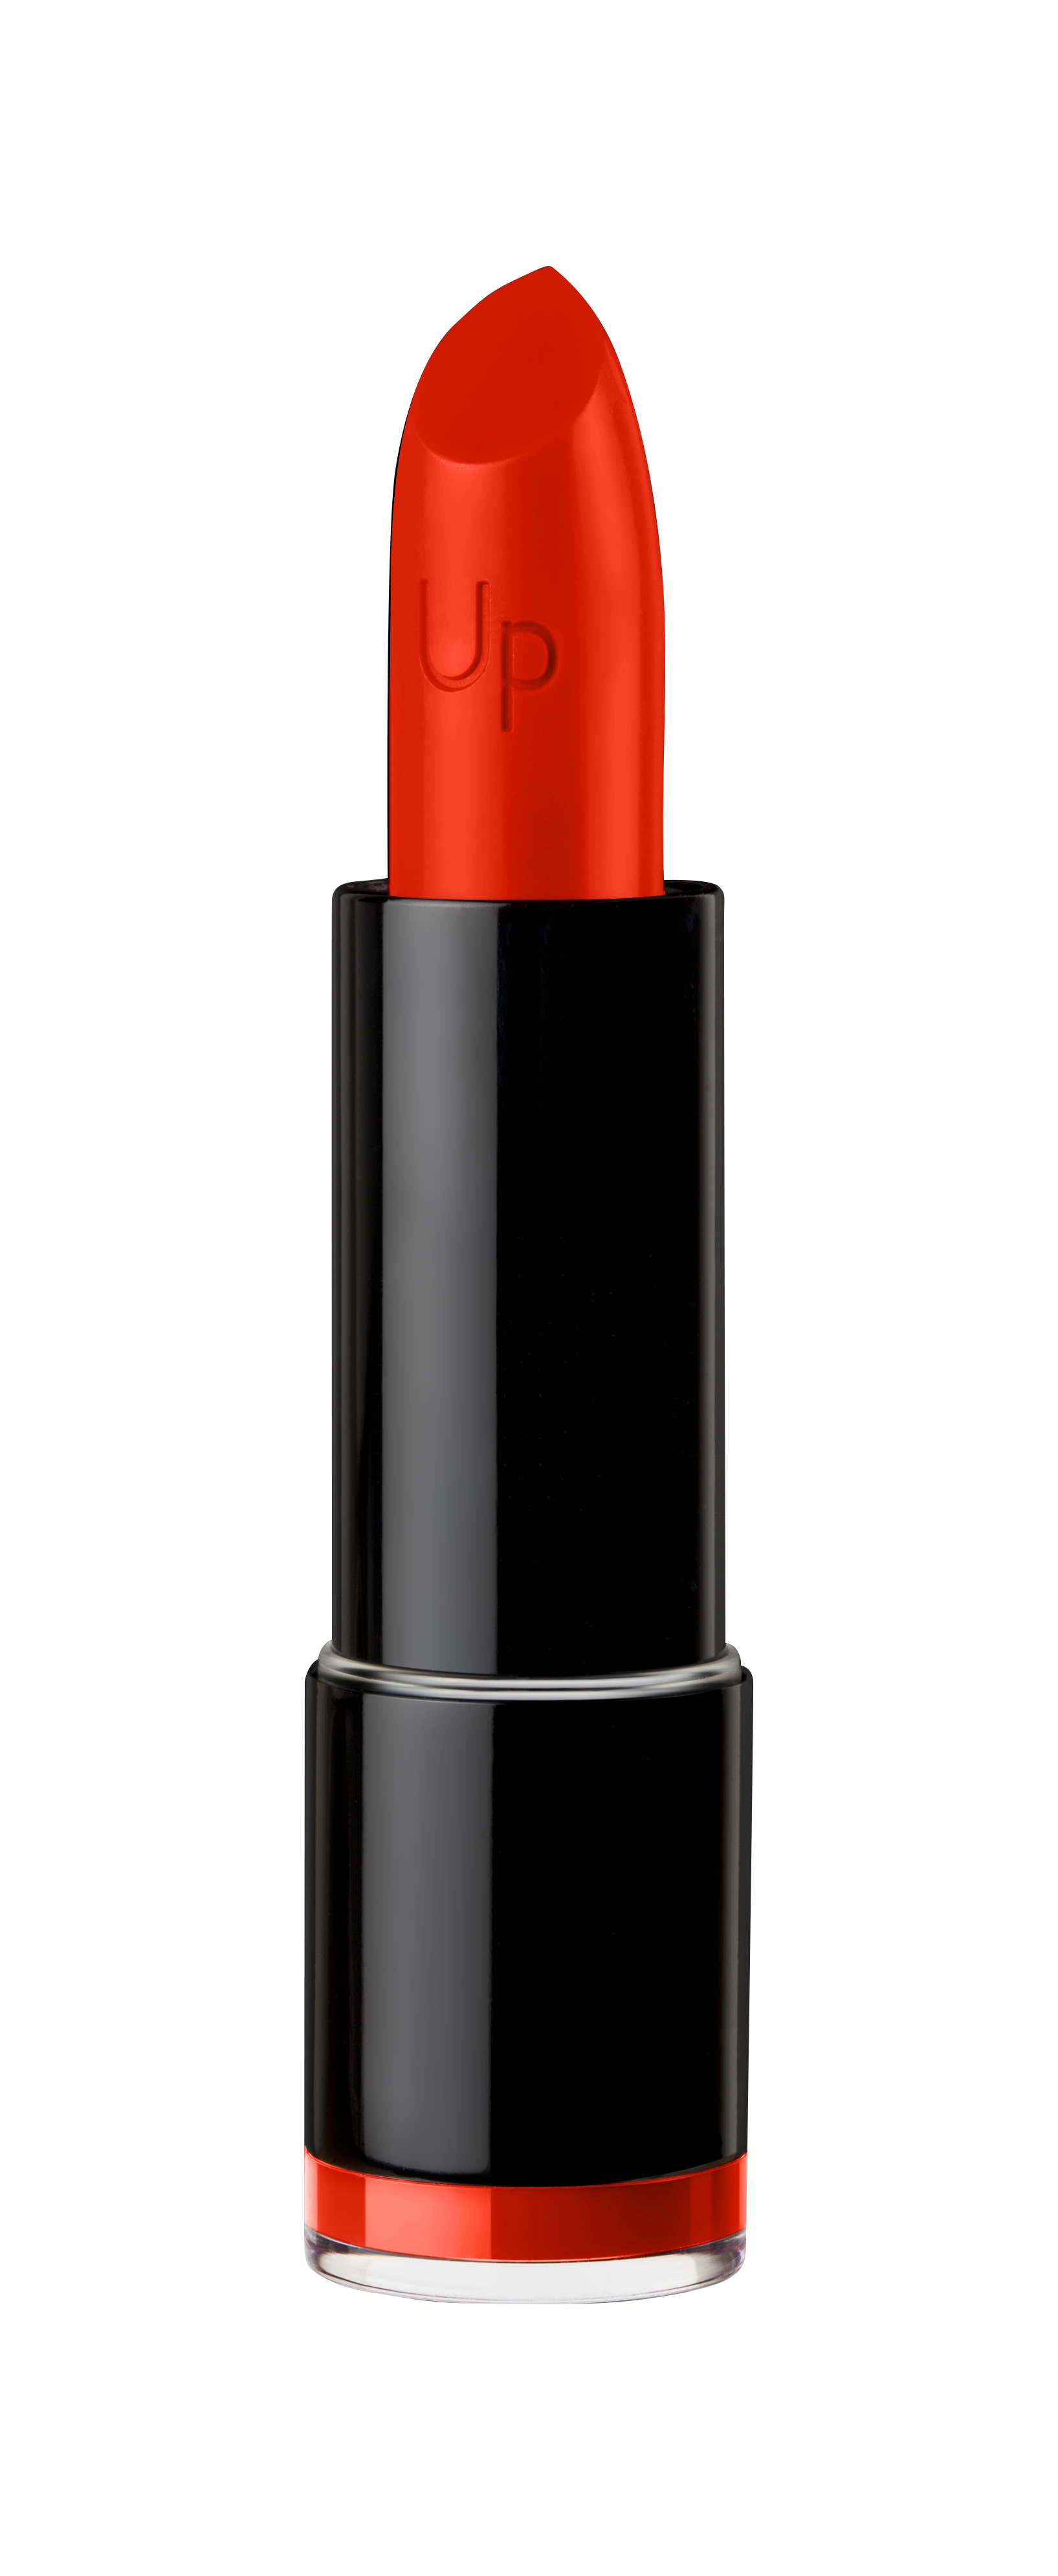 Download PNG image - Lipstick PNG Transparent Picture 